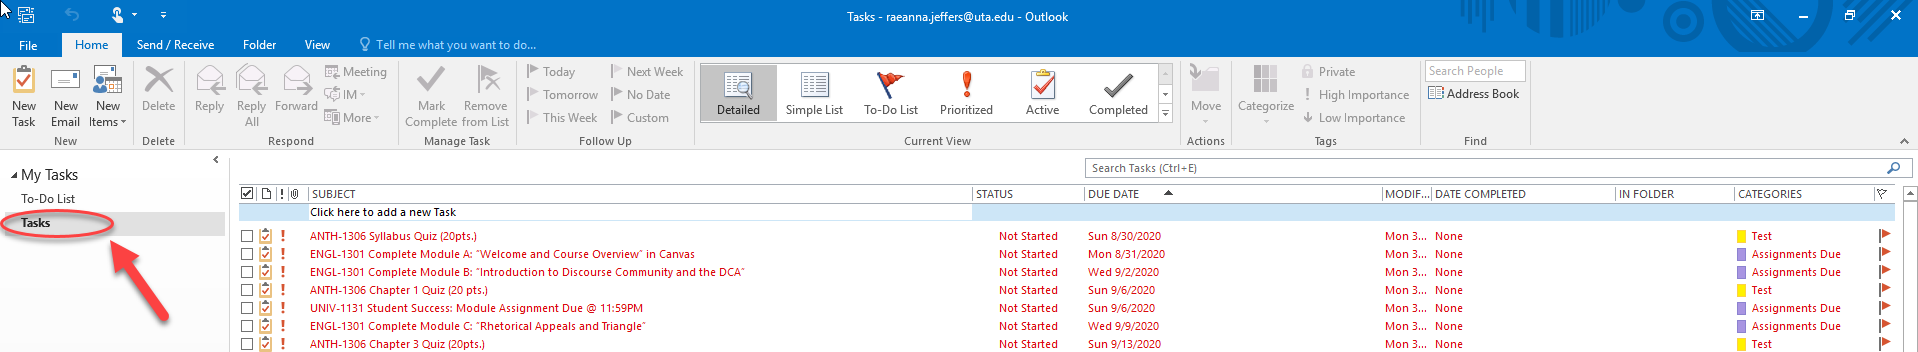 Screenshot showing how to view task list options in detailed view